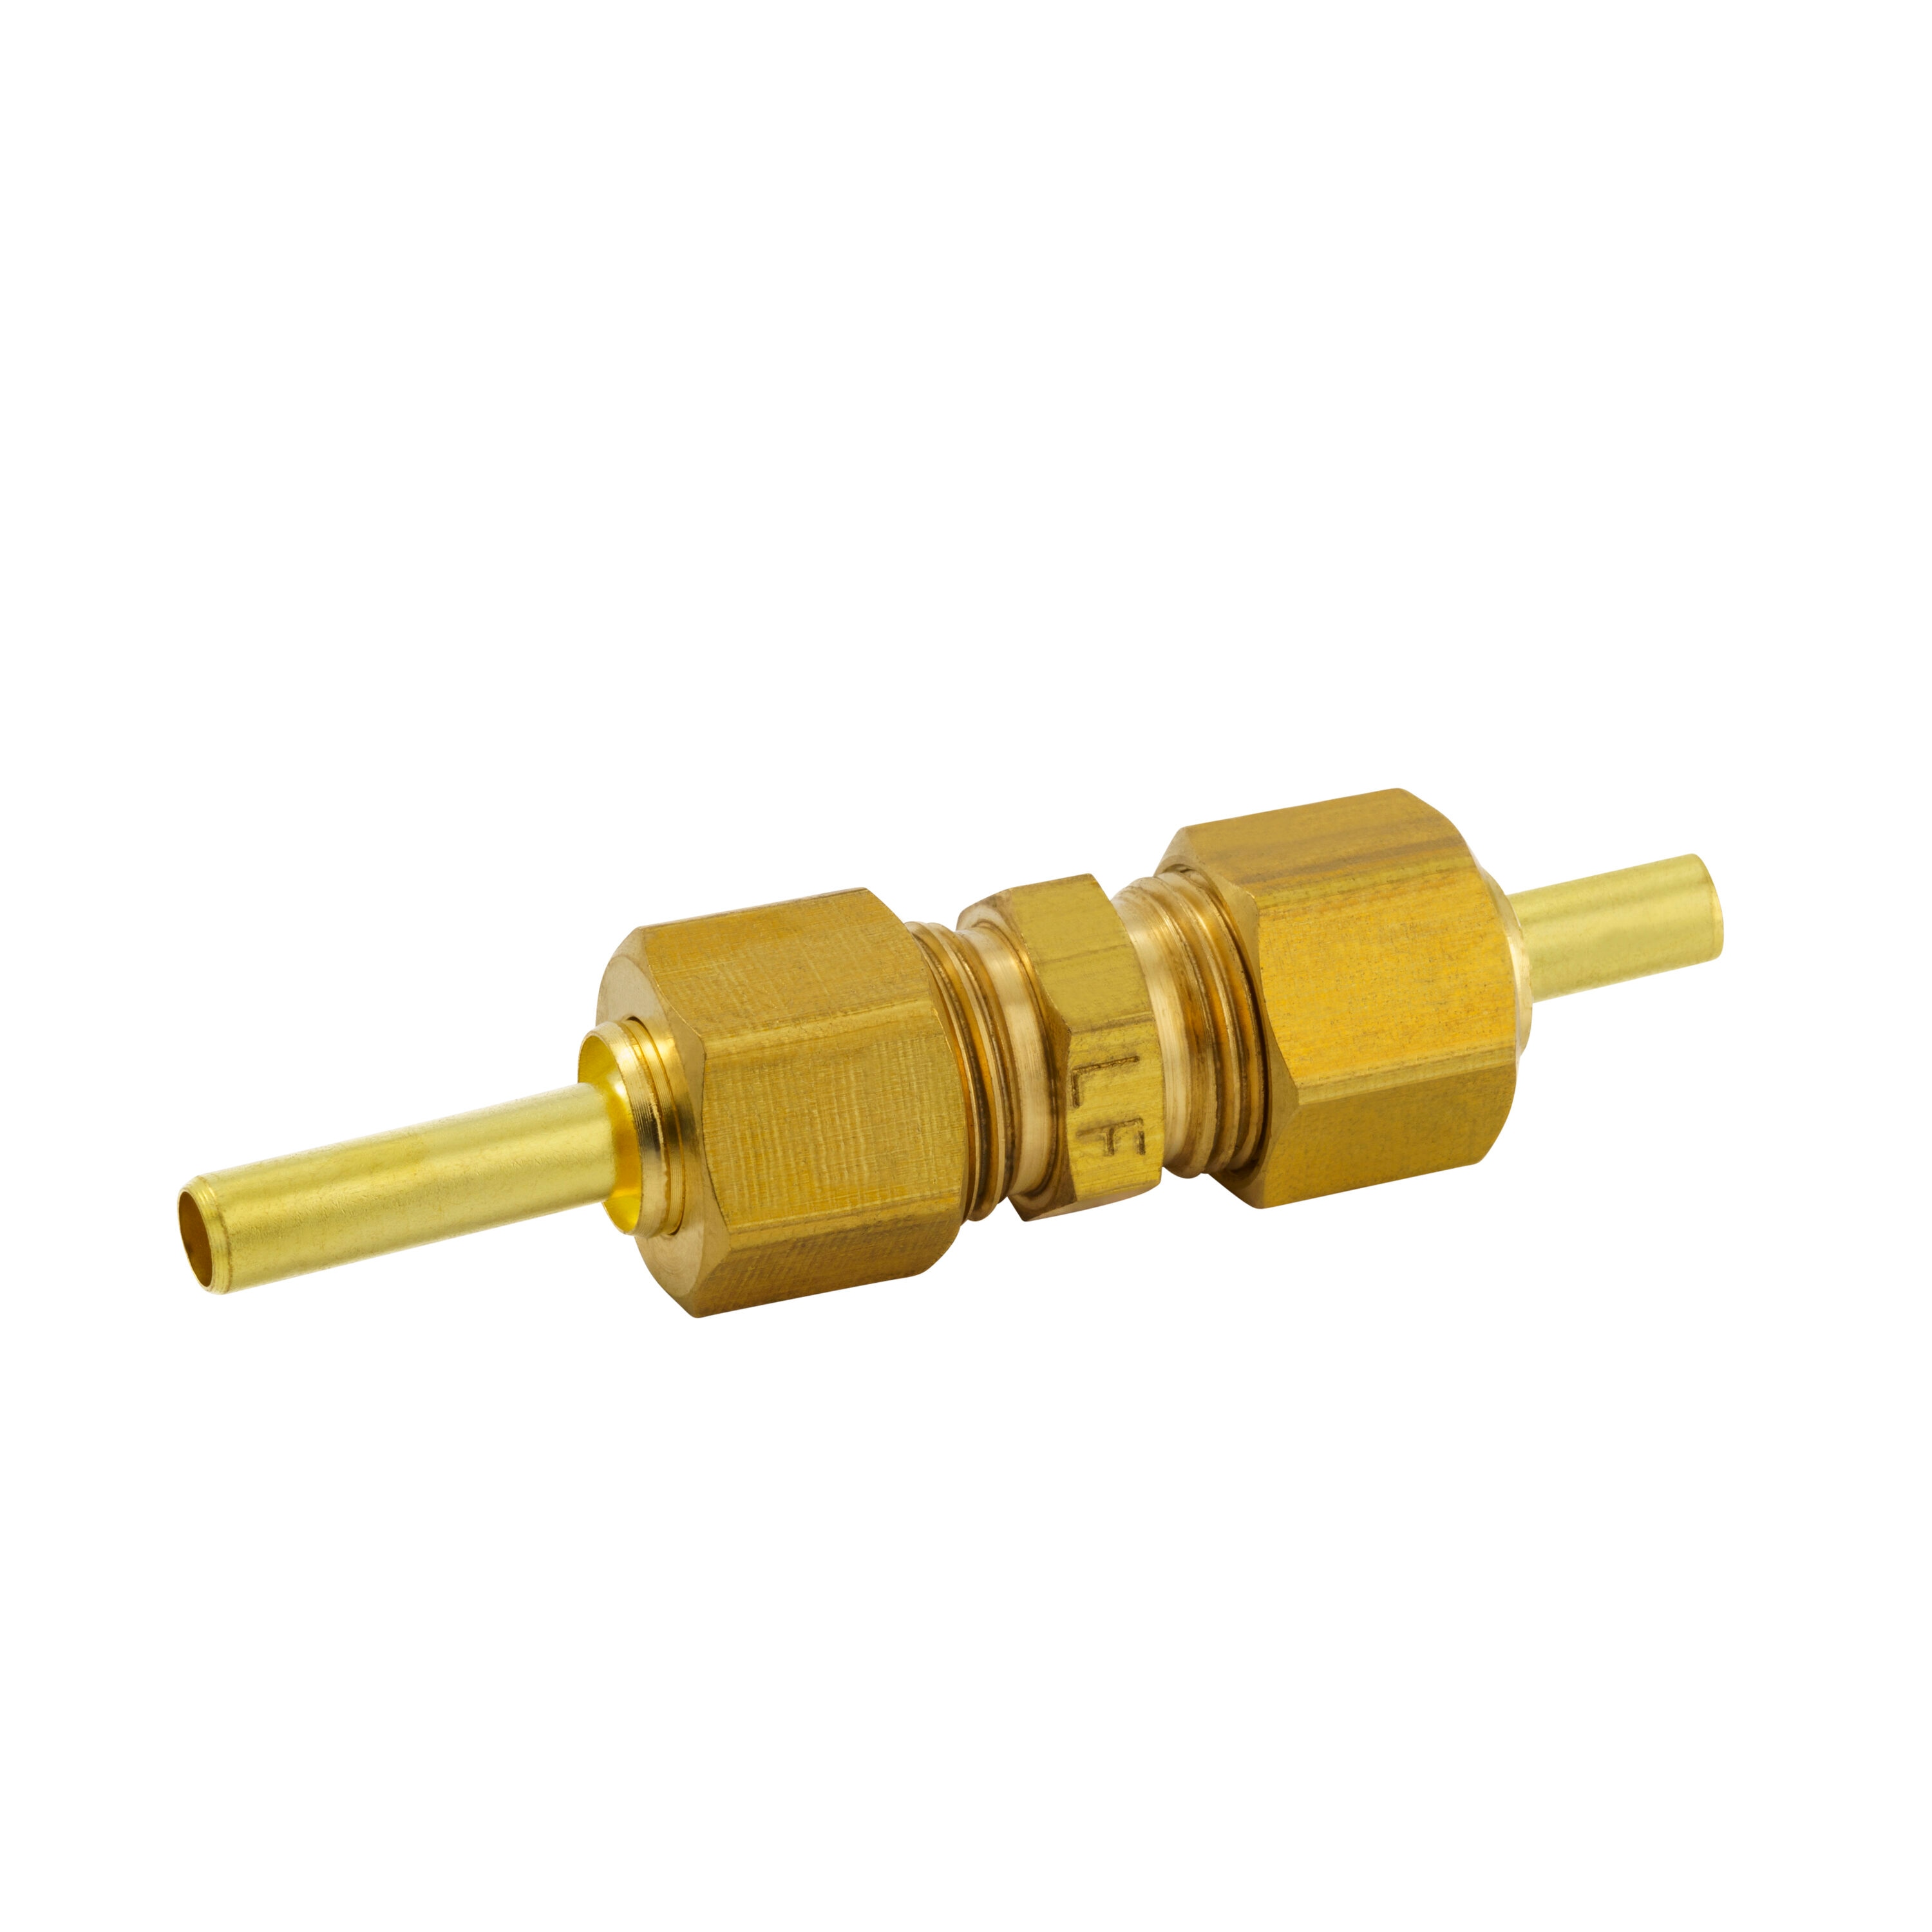 Proline Series 5/16-in x 5/16-in Compression Coupling Union